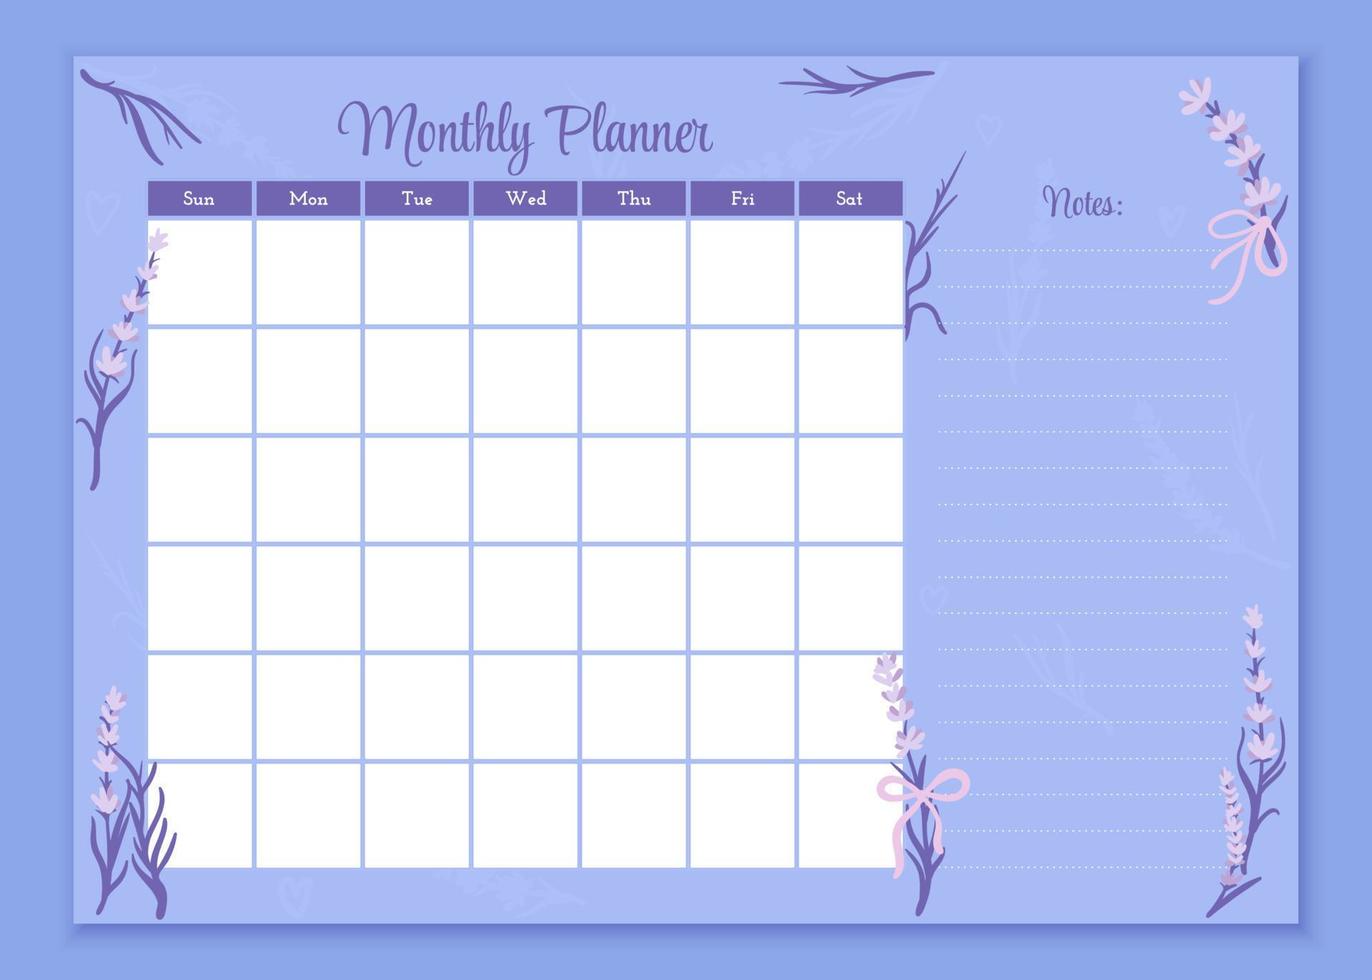 Monthly Planner to do list, notes. Printable schedule, calendar for study, school or work. Vector illustration. Lavender vector design template. Elegant cute spring flowers organizer and notepad.